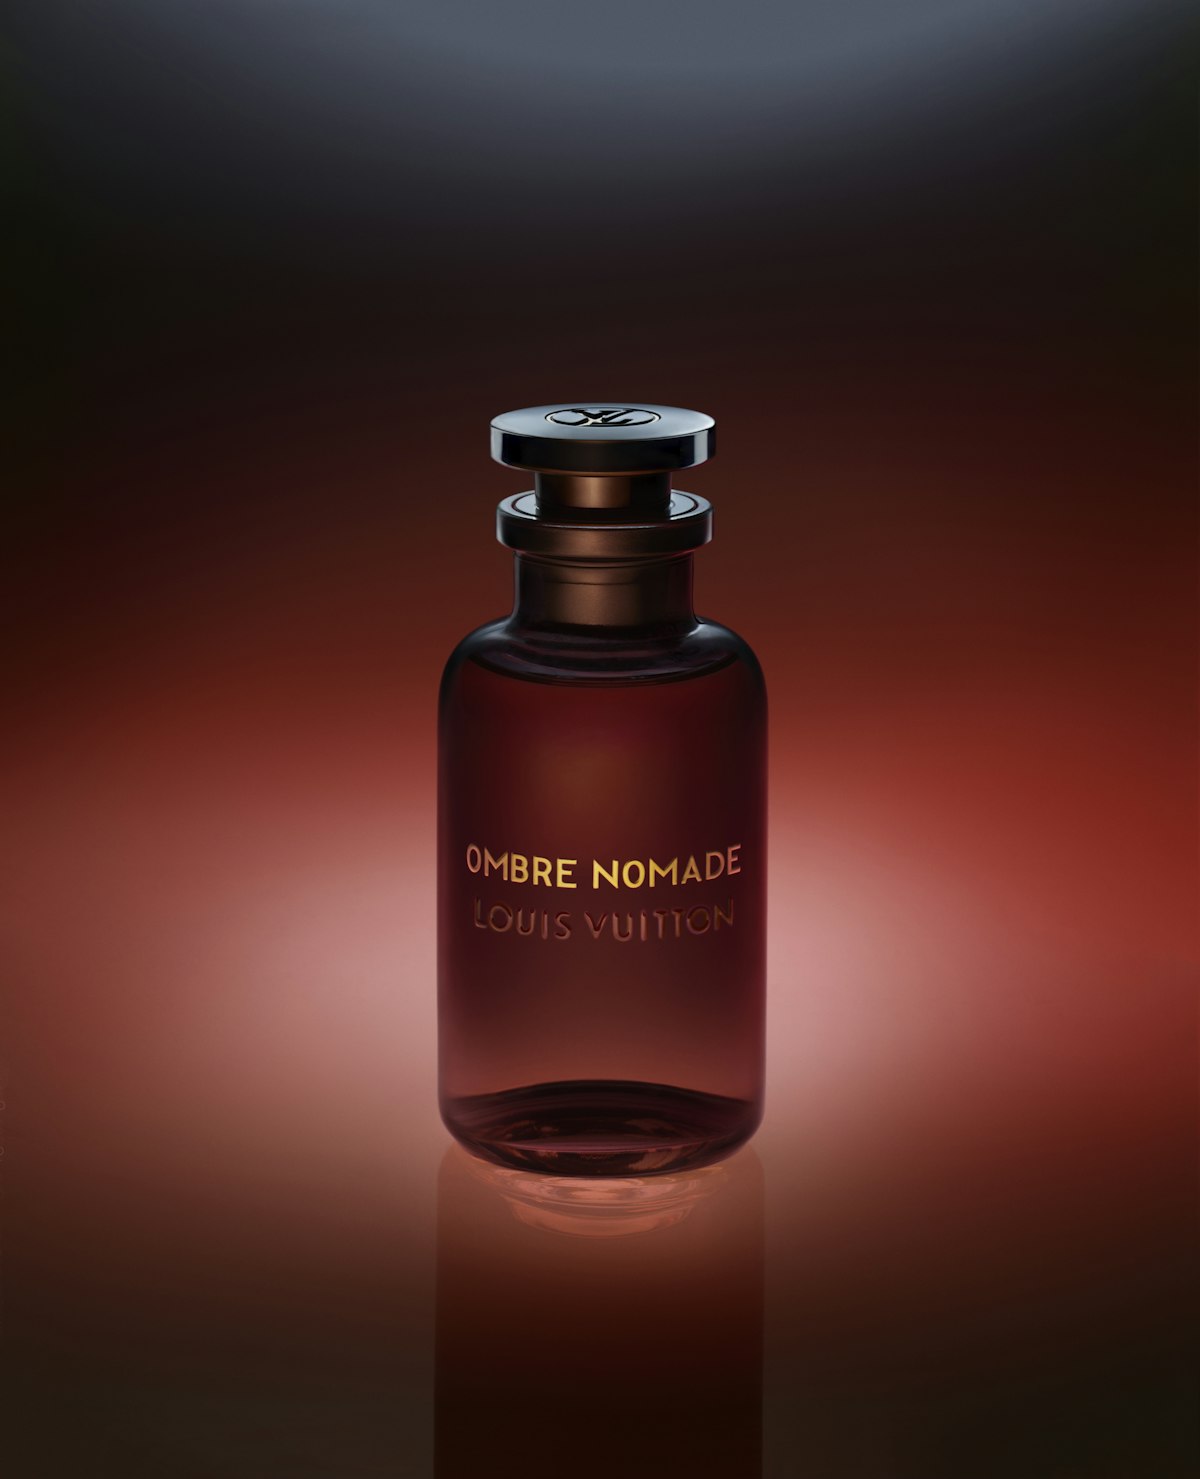 New Designer Fragrances in 2018: Louis Vuitton Presents the Ombre Nomade